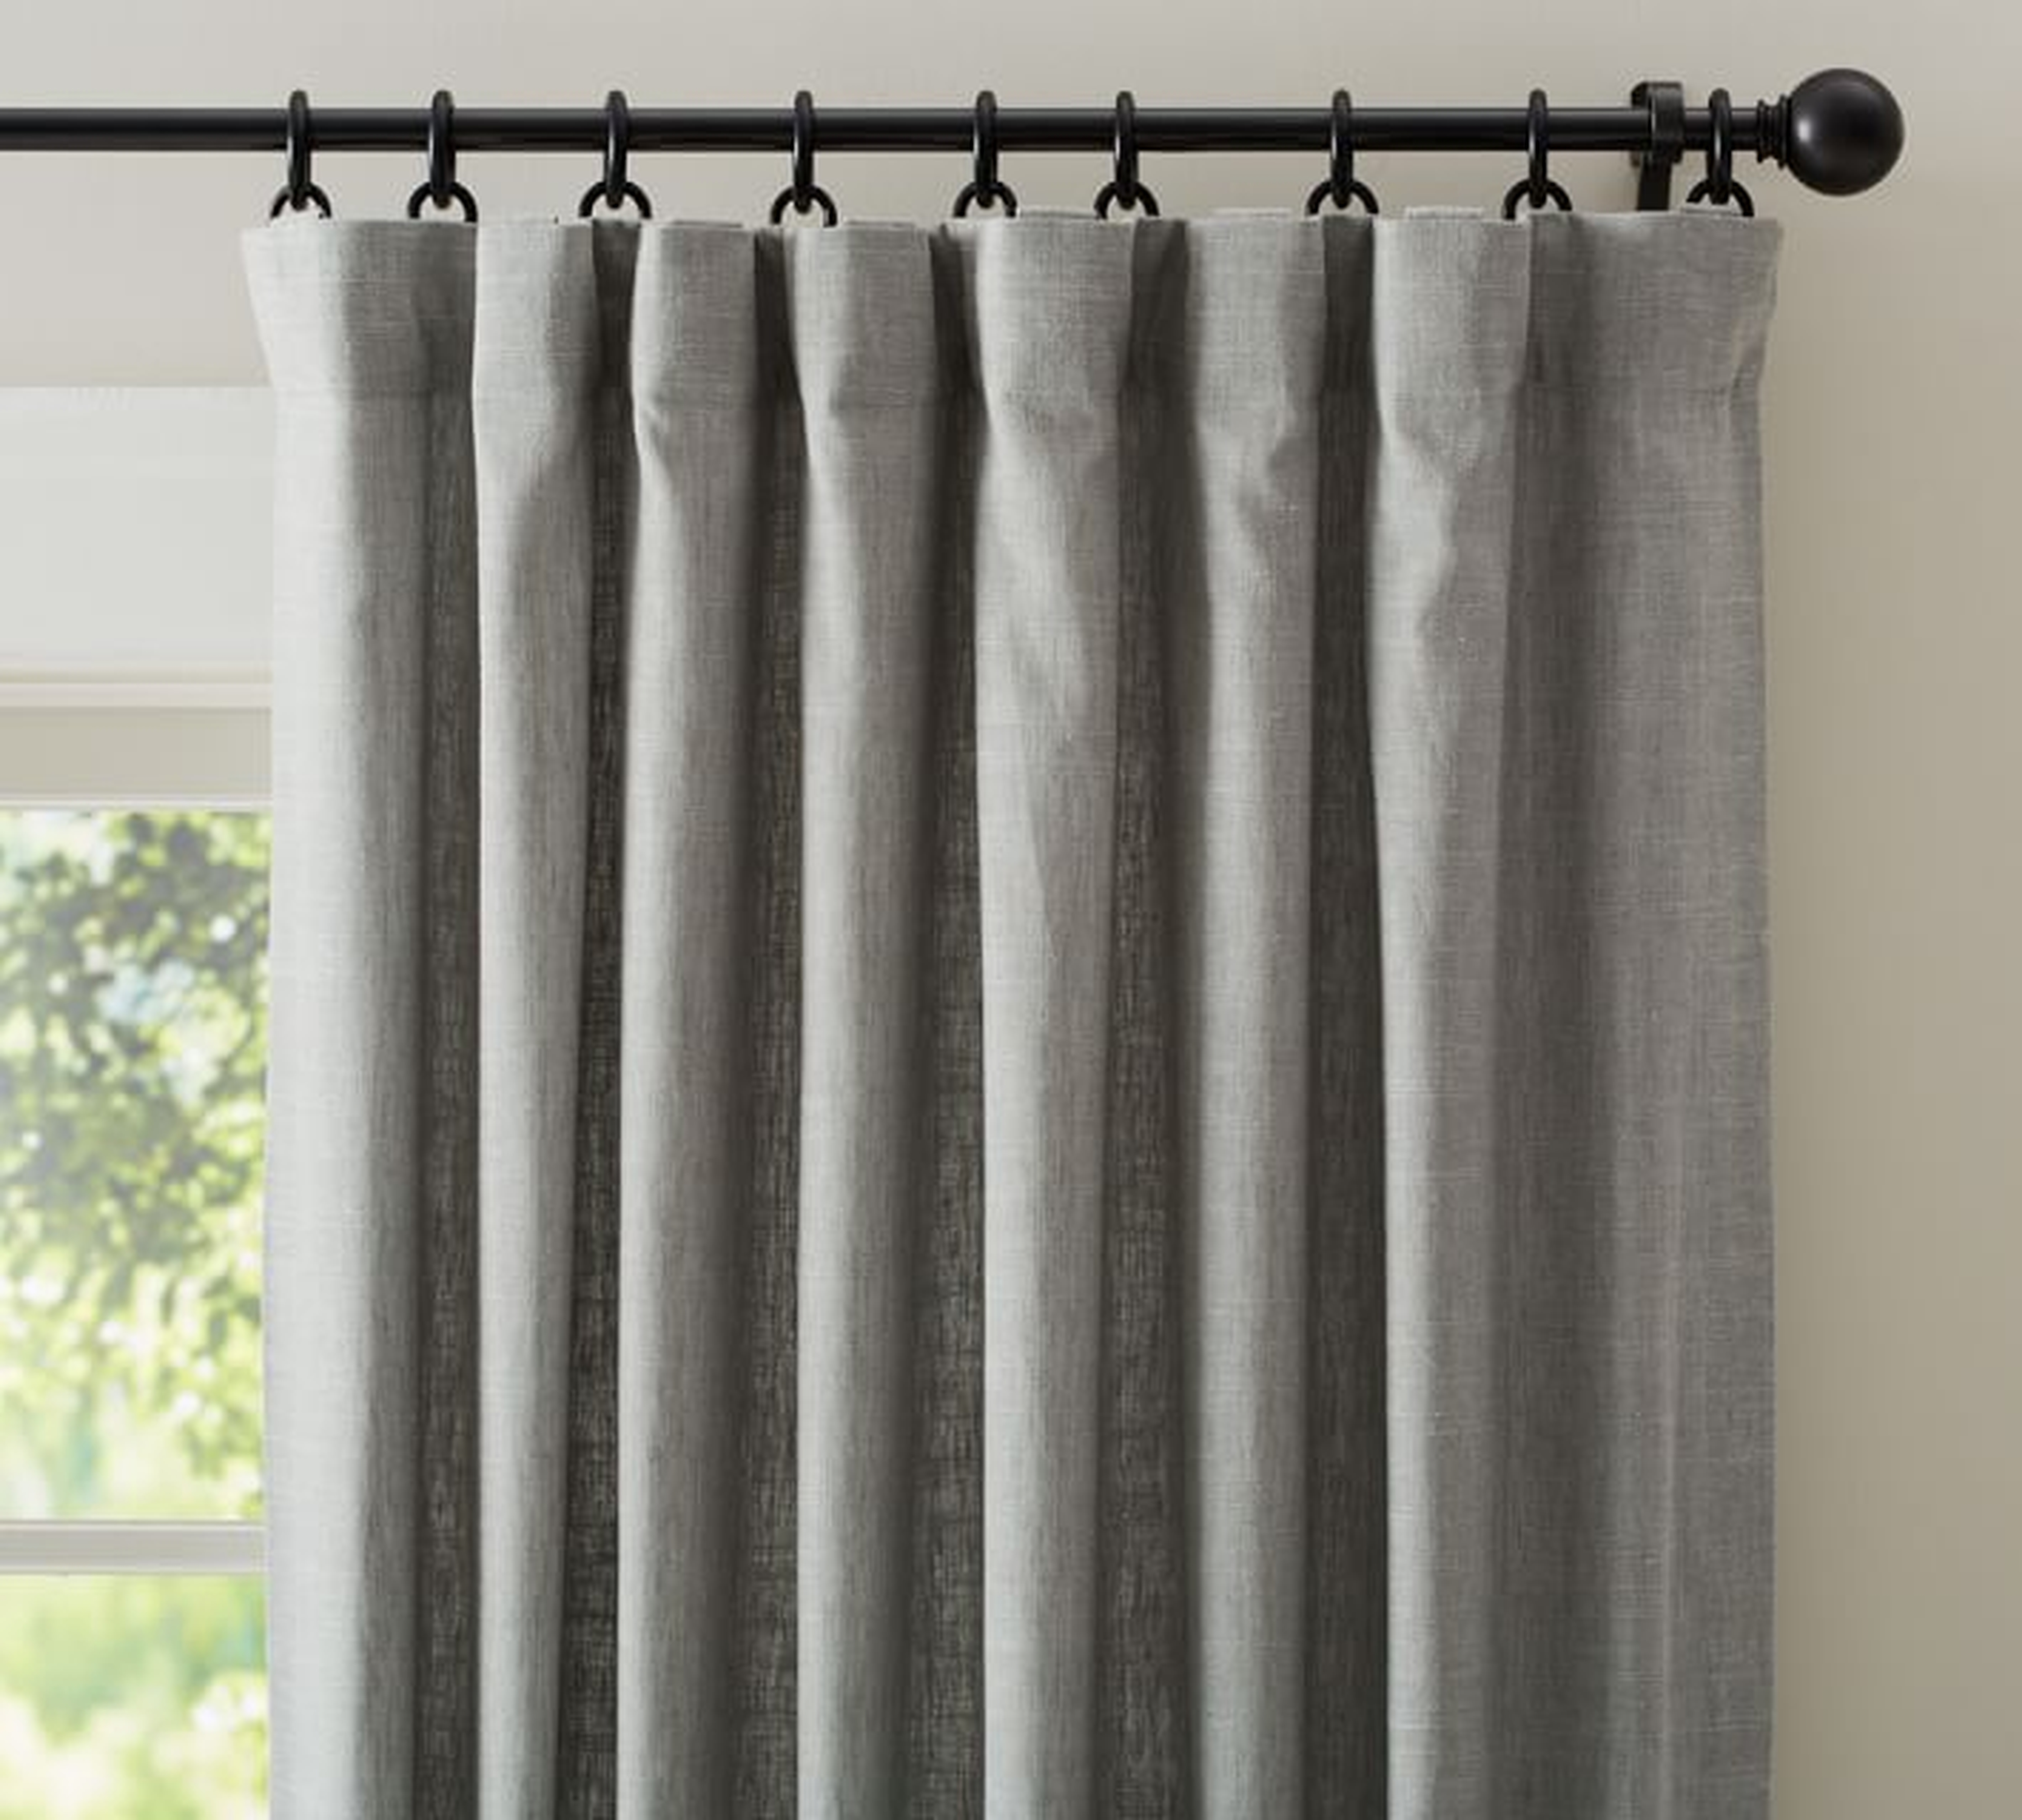 EMERY LINEN/COTTON POLE-POCKET CURTAIN - GRAY, black-out lining - Pottery Barn